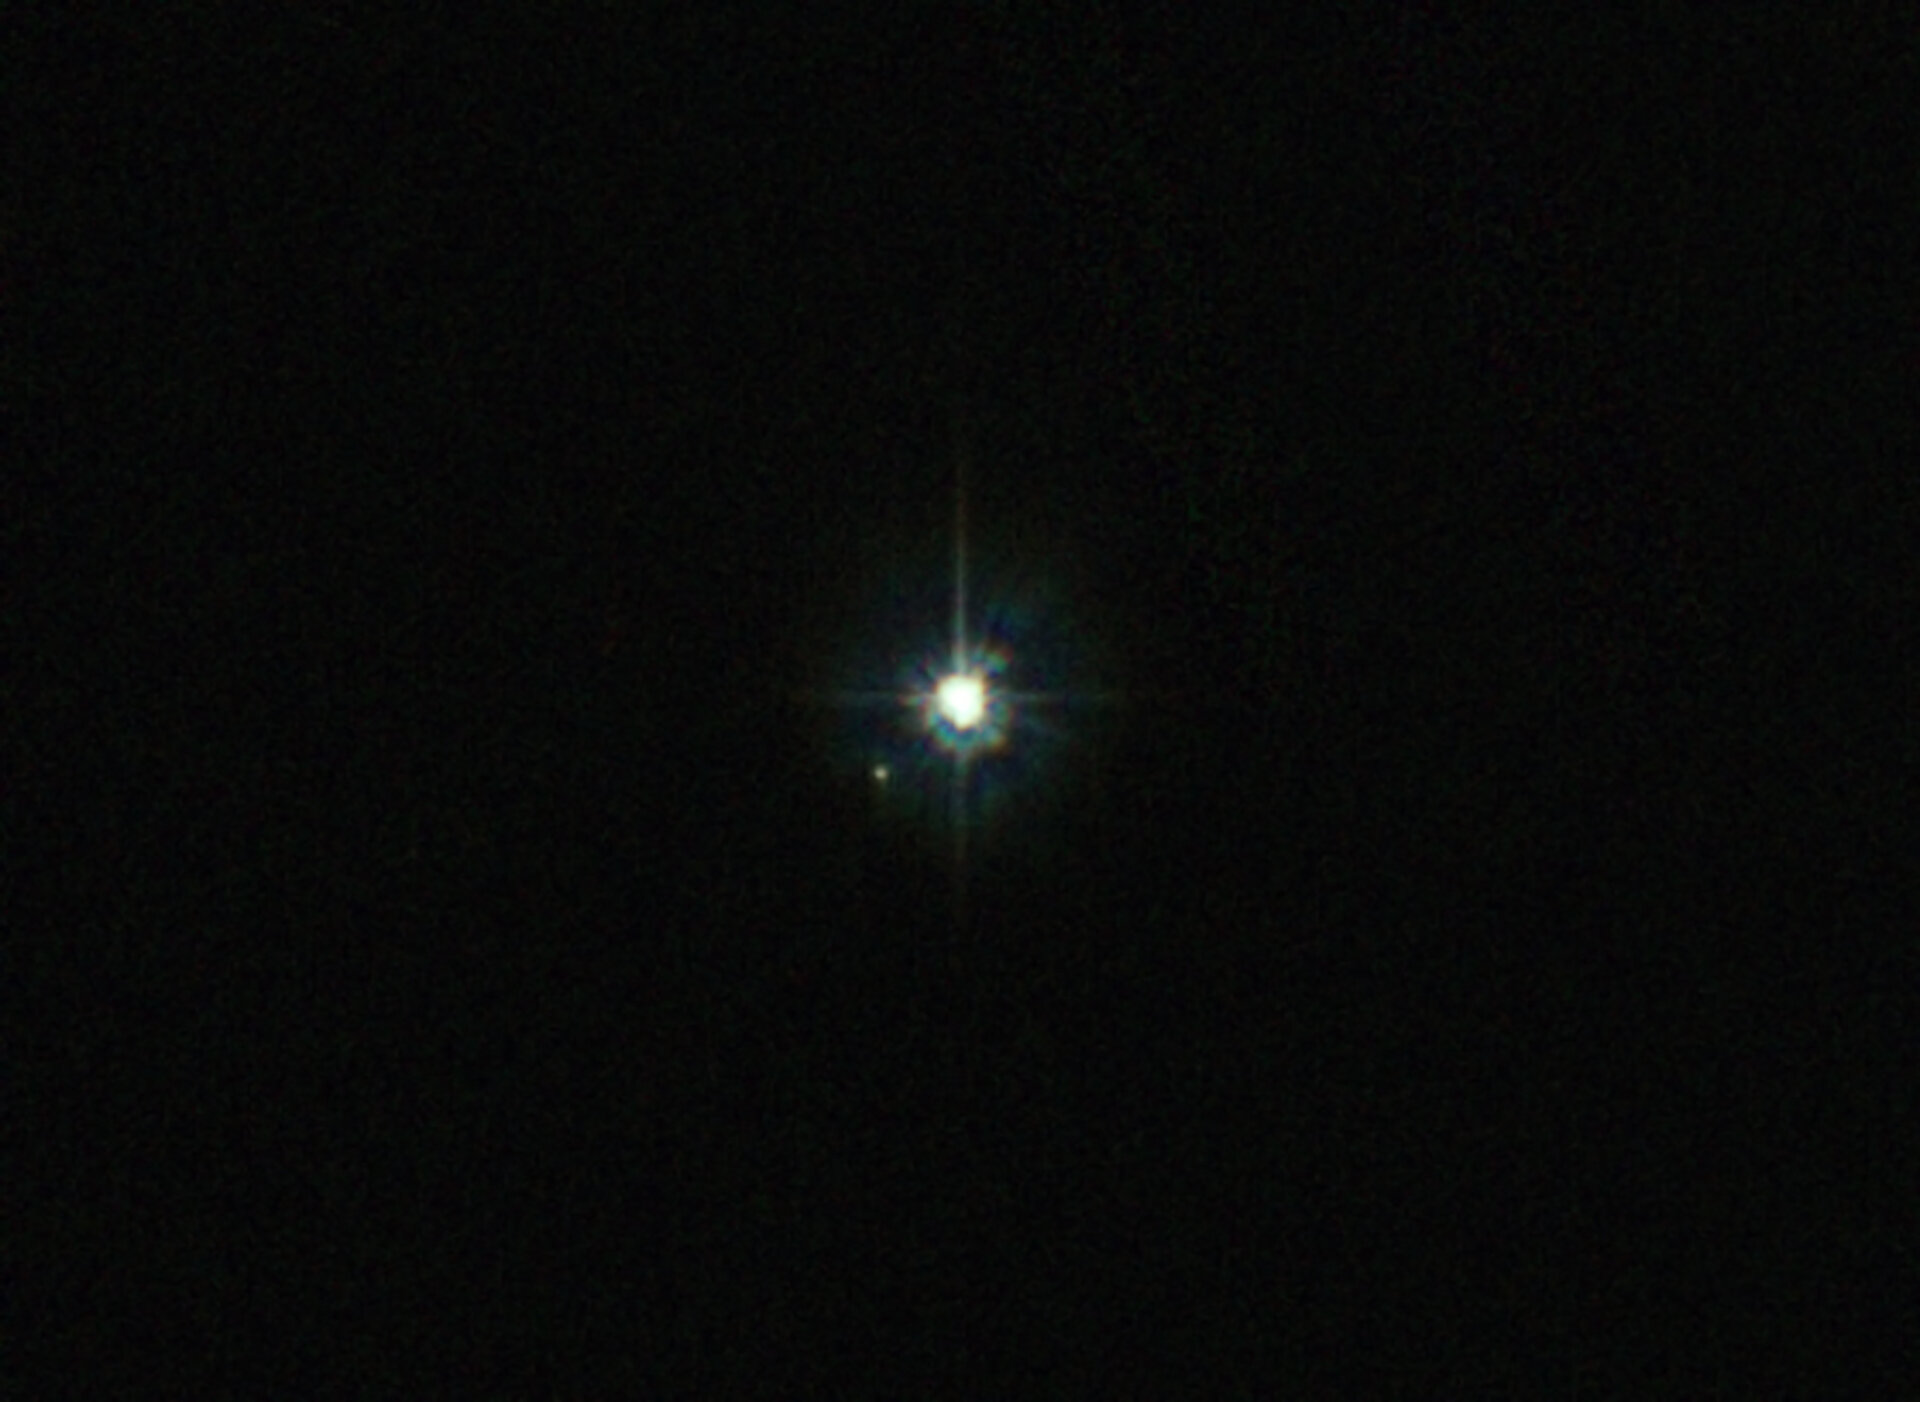 The multiple-star system of Tr16-244